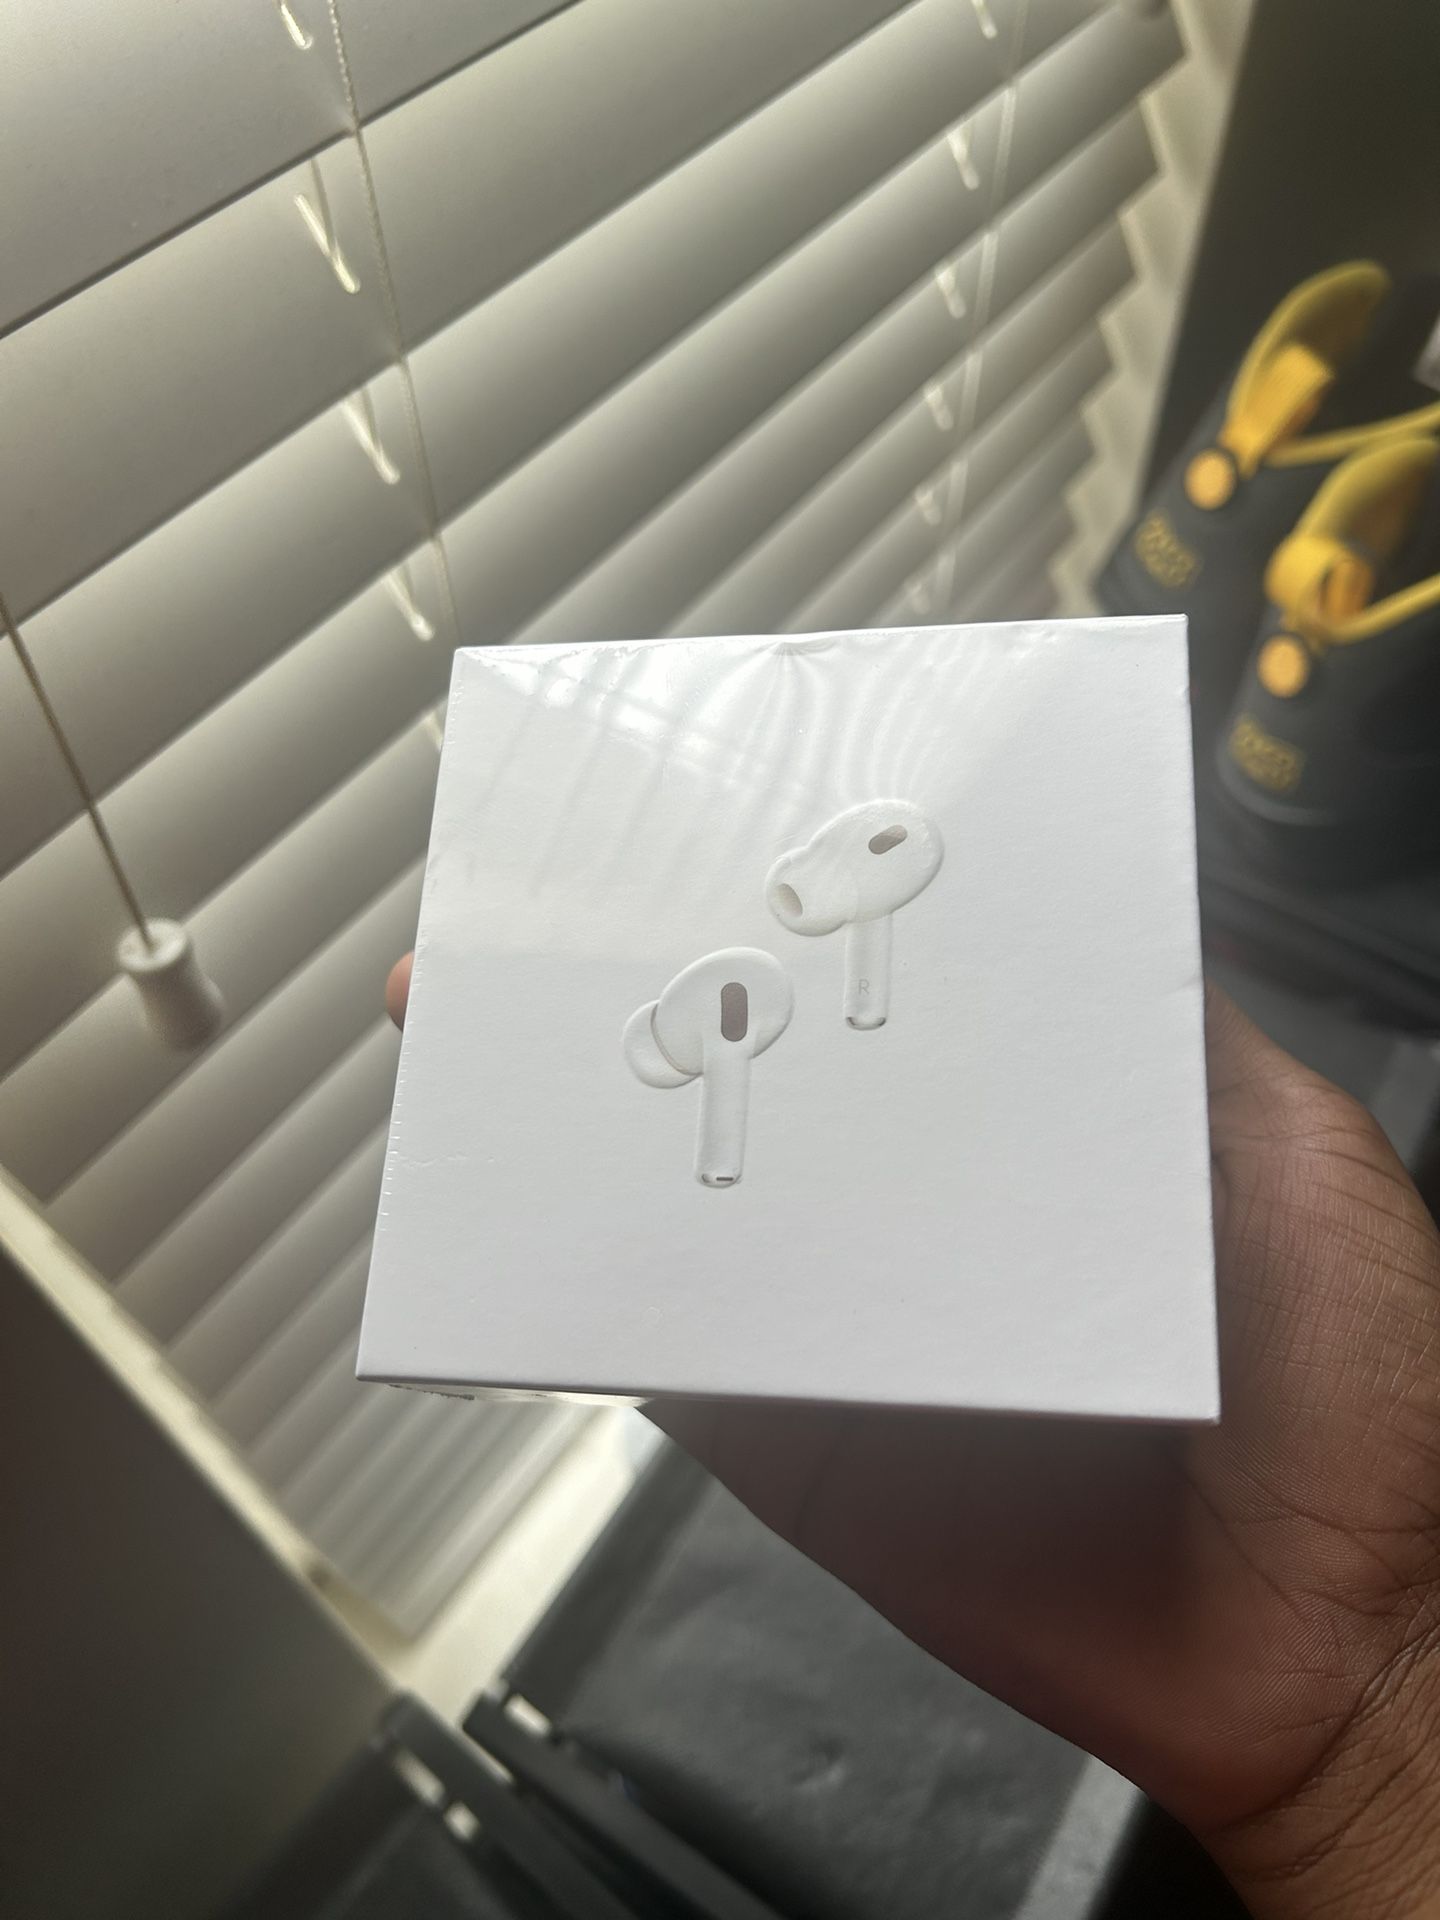 Airpods Pro 2nd Generation never used